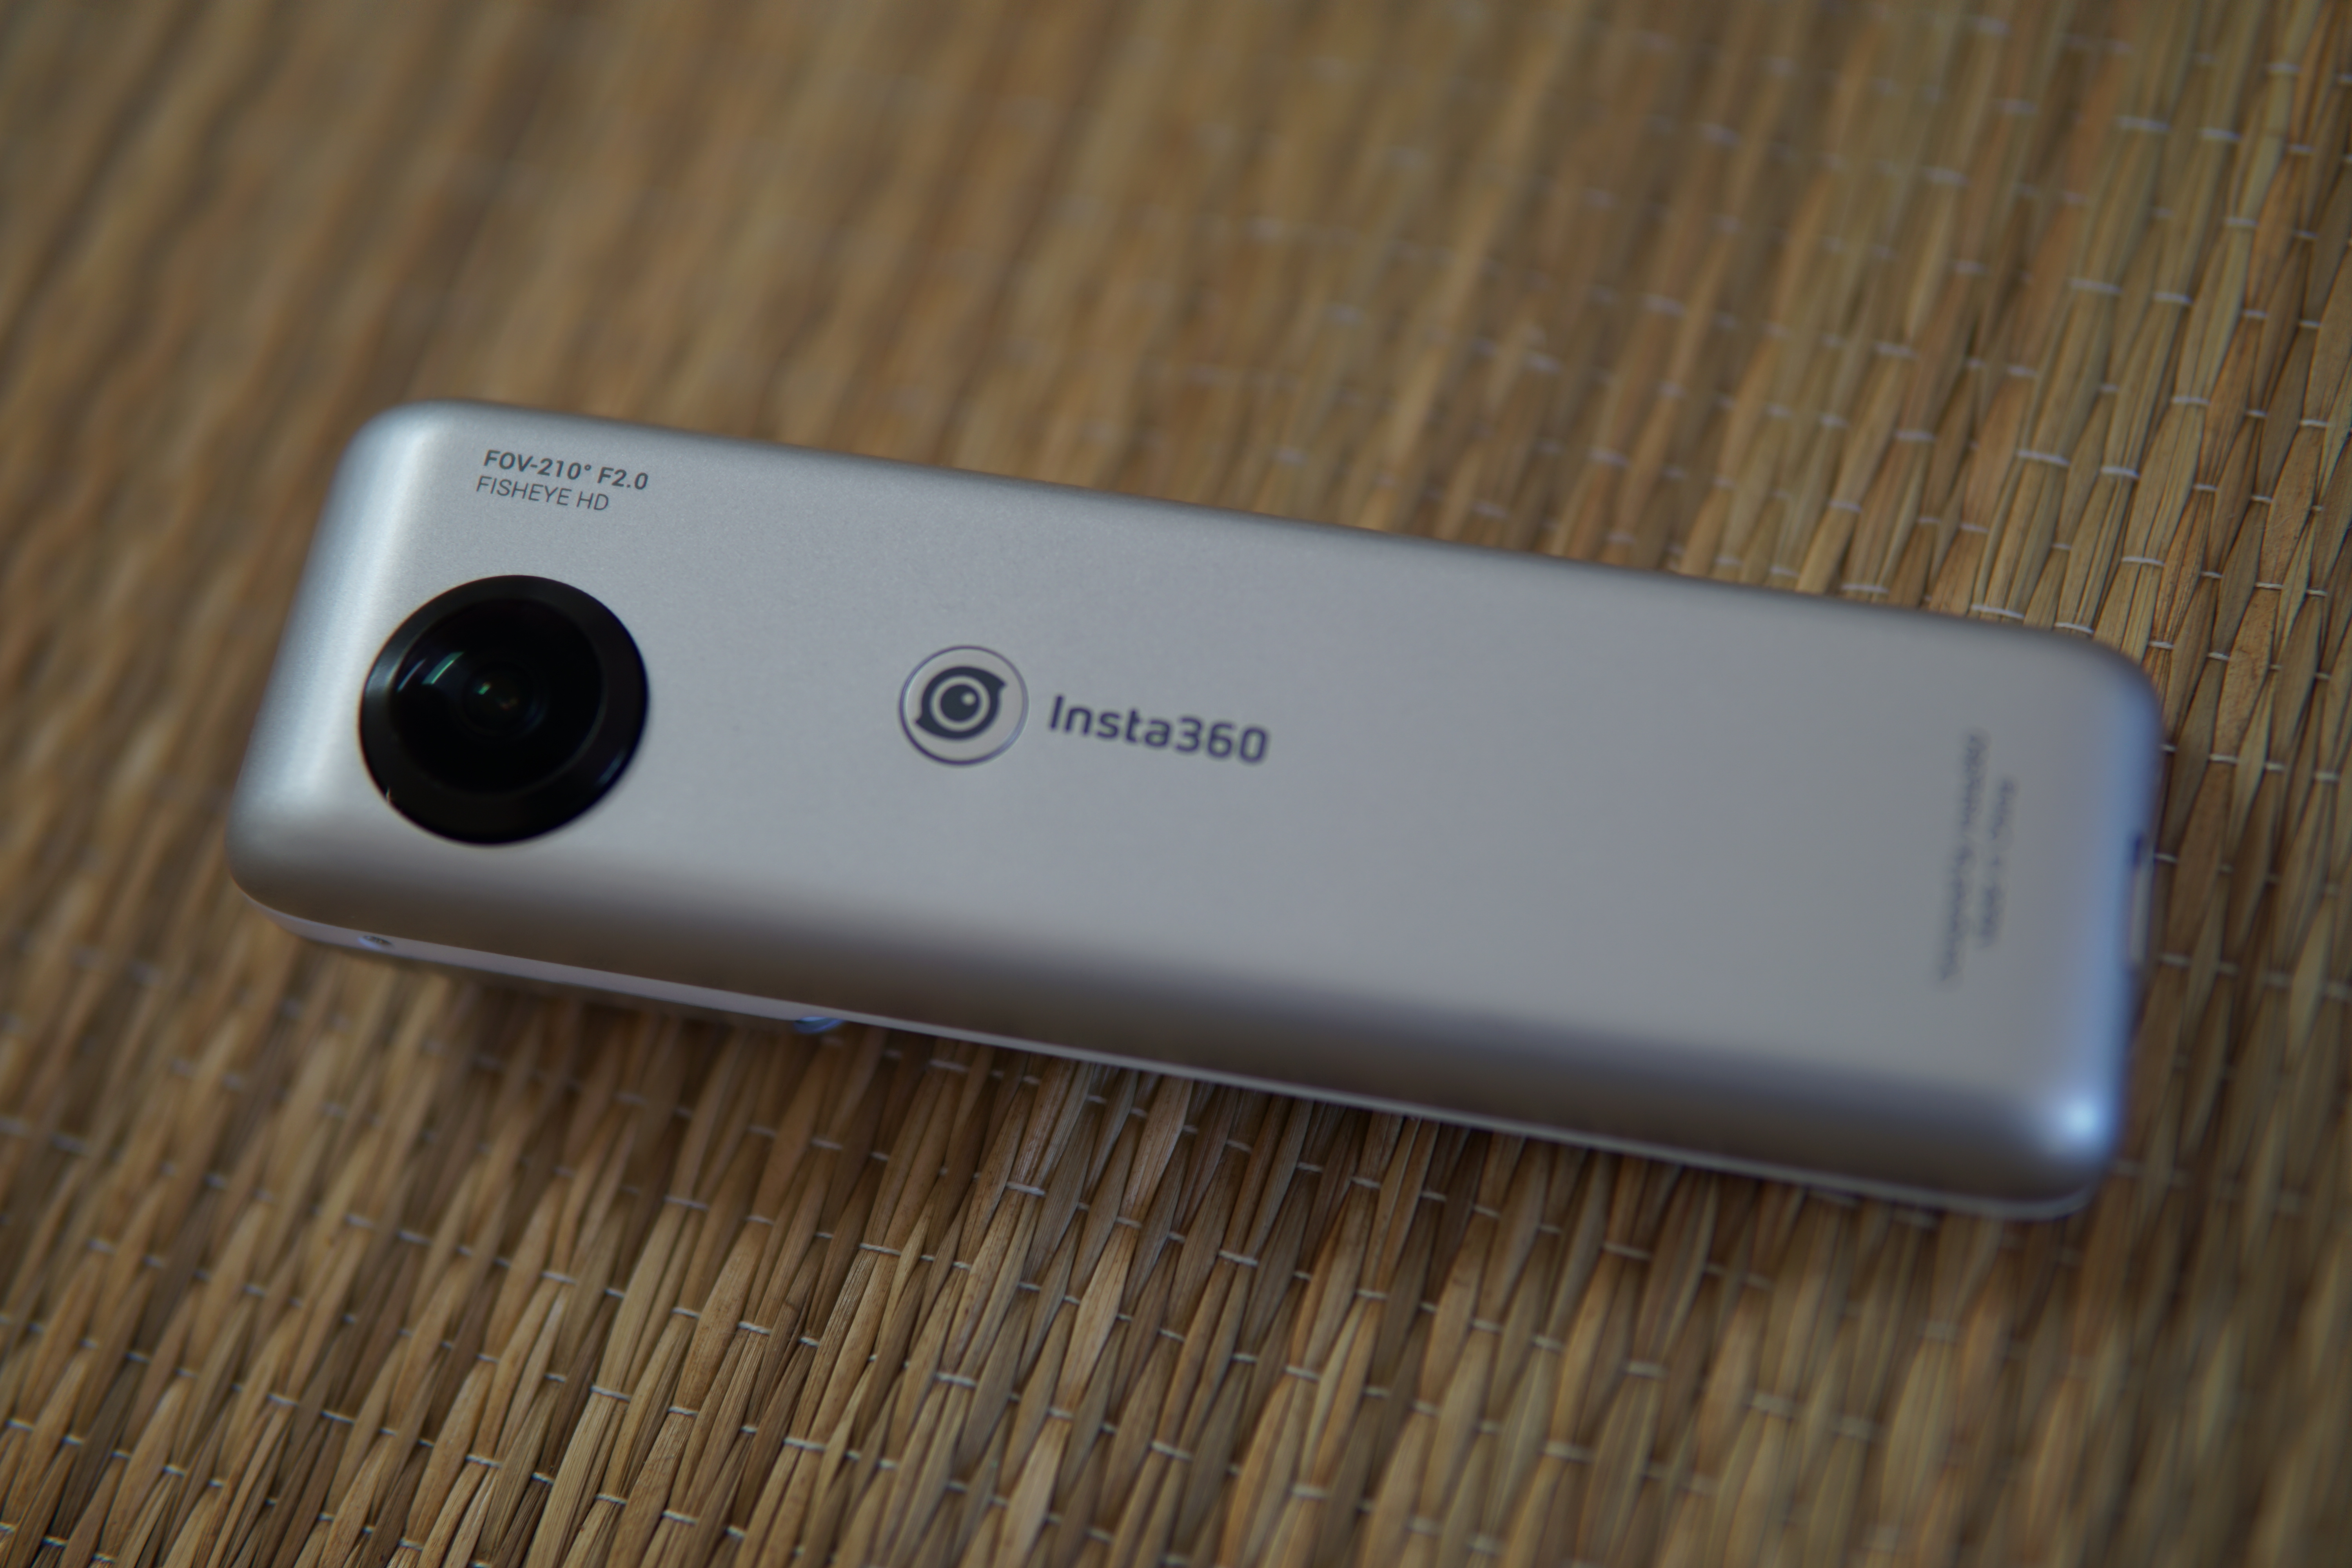 The Insta360 Nano is specifically designed for the iPhone and offers lots of features.